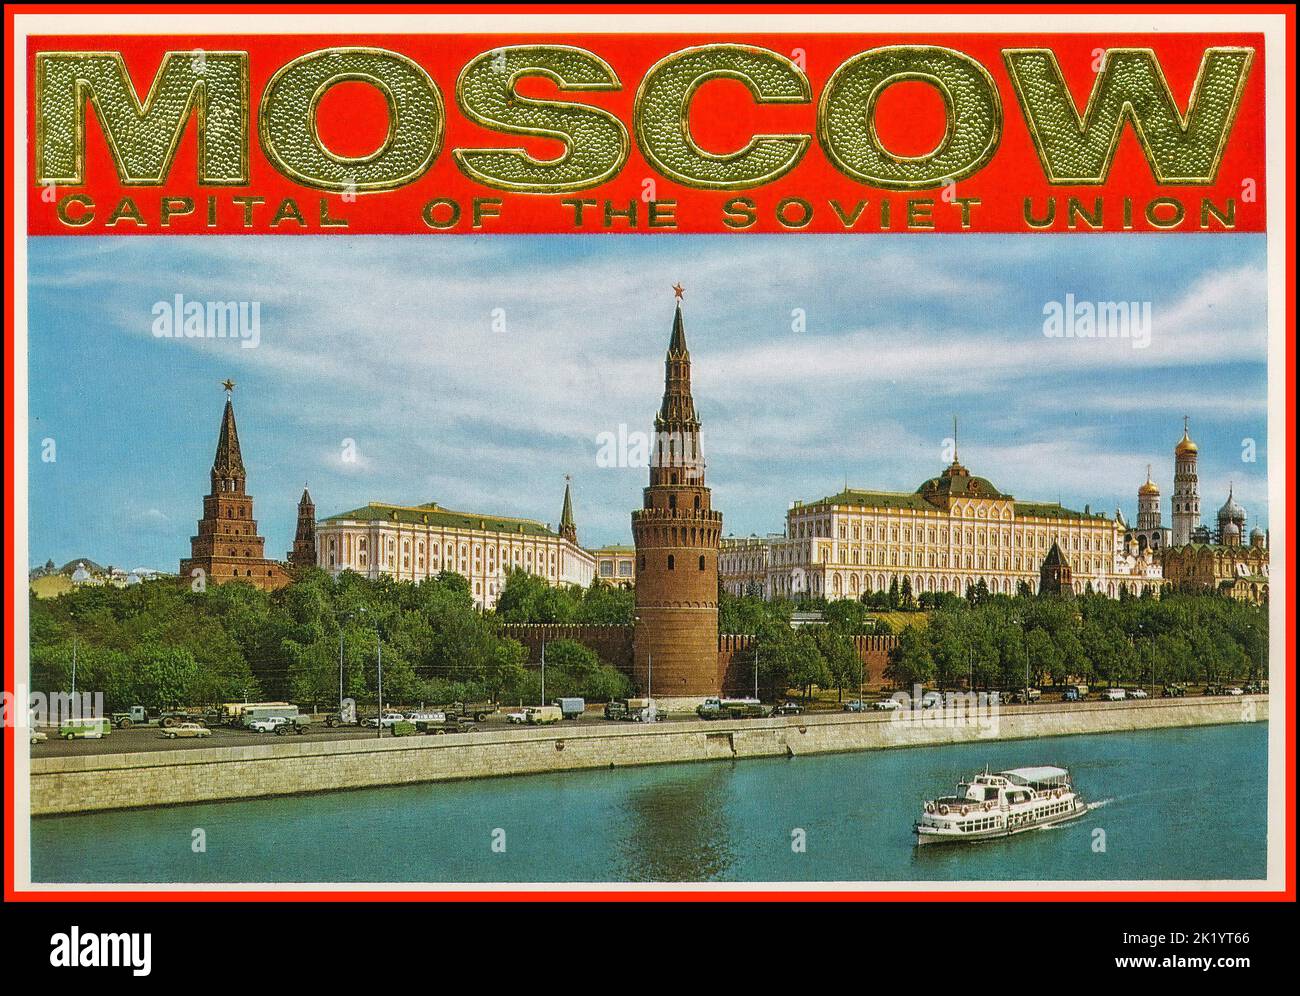 Vintage Moscow Capital of the Soviet Union Travel Brochure cover 1960s Moskva River, Moscow River, Soviet Union USSR Russia Moskva River Stock Photo